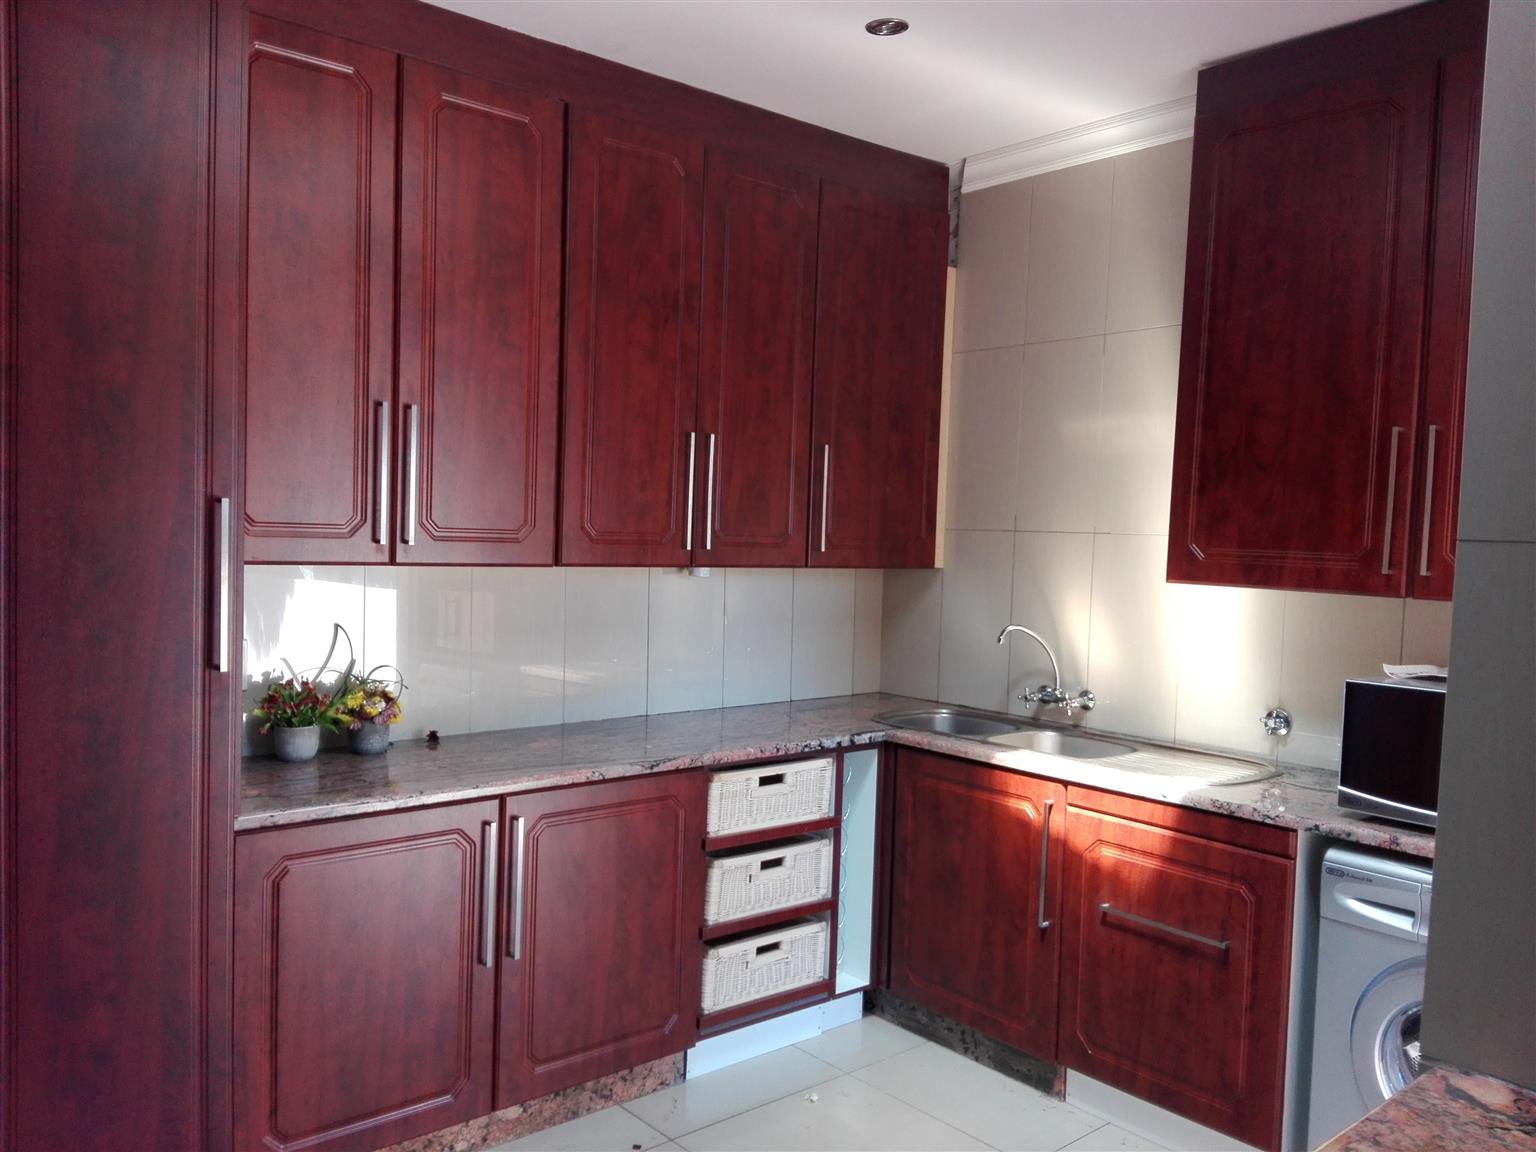 kitchen cupboards at affordable low prices .